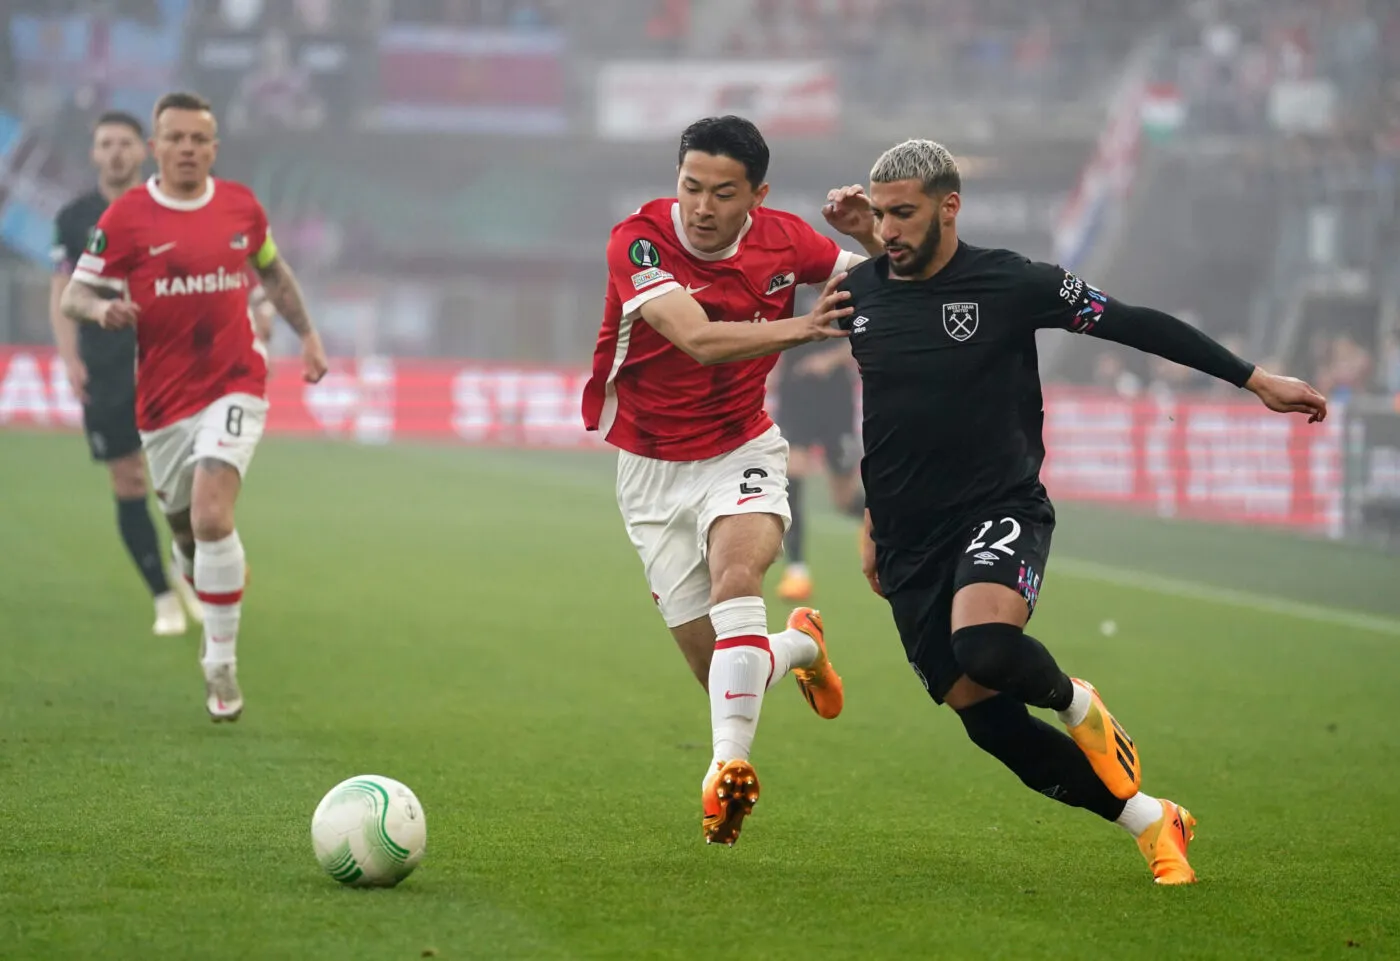 AZ Alkmaar's Yukinari Sugawara and West Ham United's Said Benrahma (right) battle for the ball during the UEFA Europa Conference League semi-final at the AFAS Stadium, Alkmaar. Picture date: Thursday May 18, 2022. - Photo by Icon sport